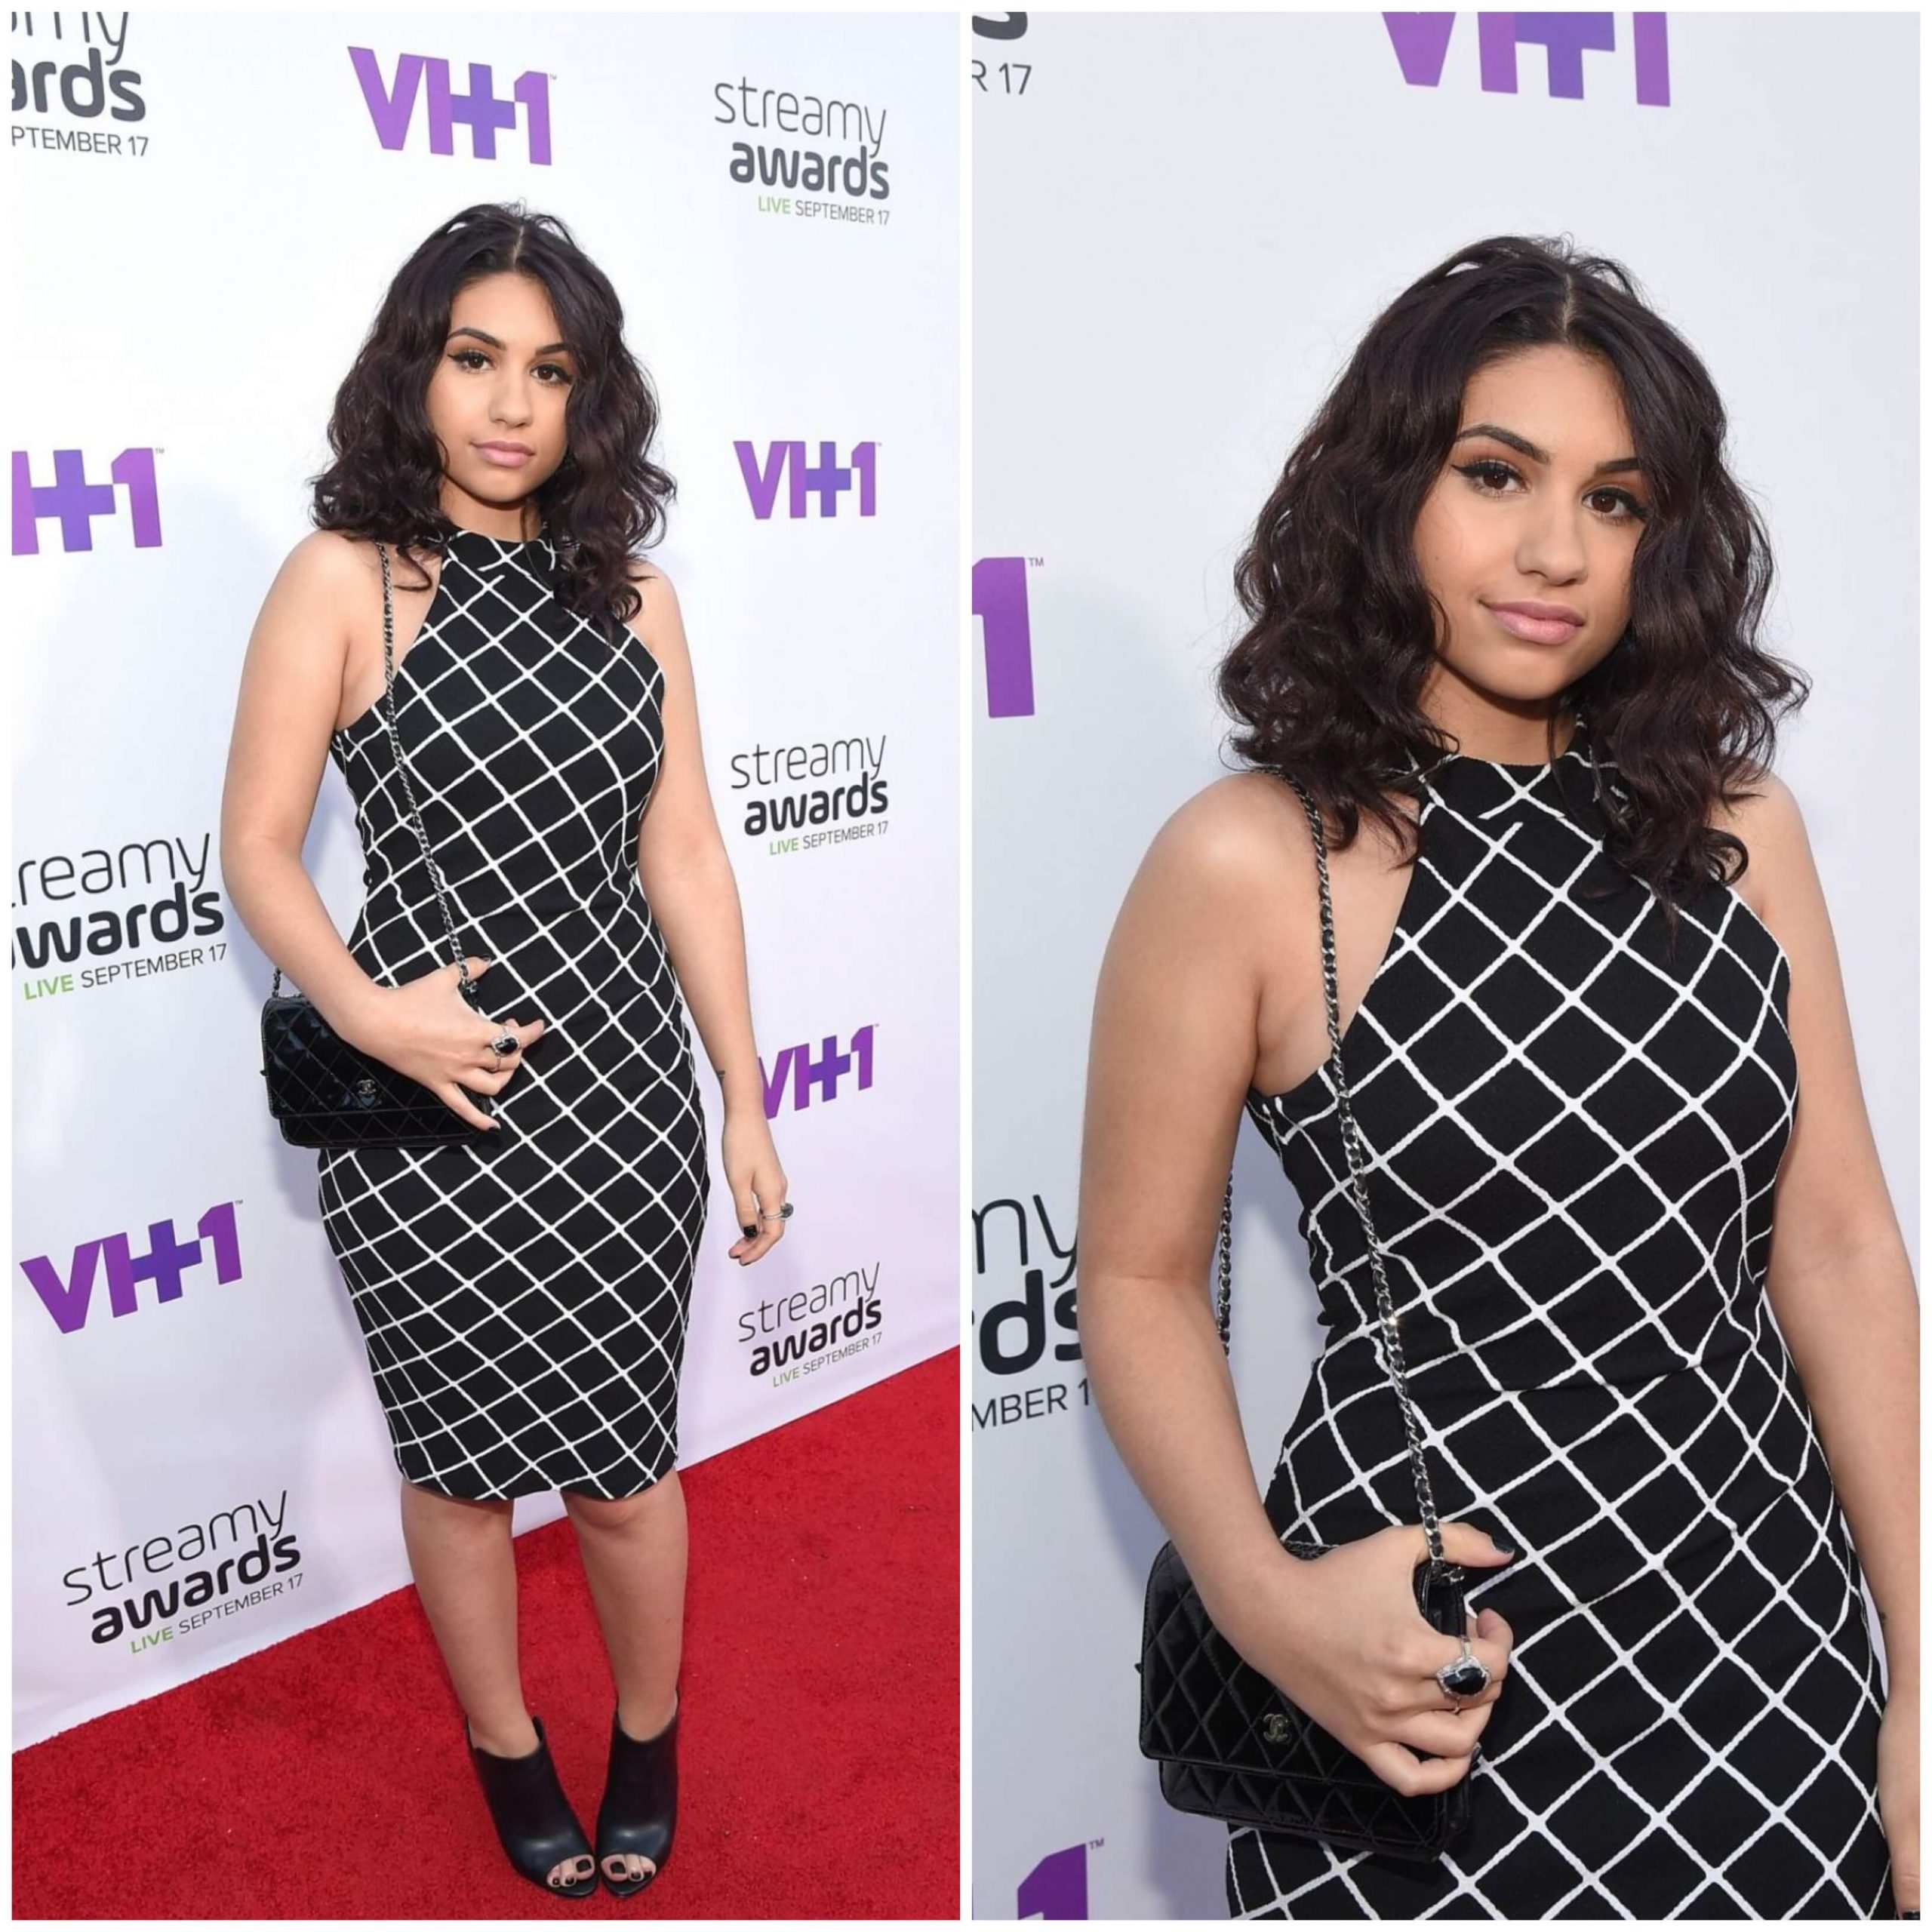 Alessia Cara –In Black & White Checked Halter Neck outfit - 2015 Streamy Awards in Los Angeles